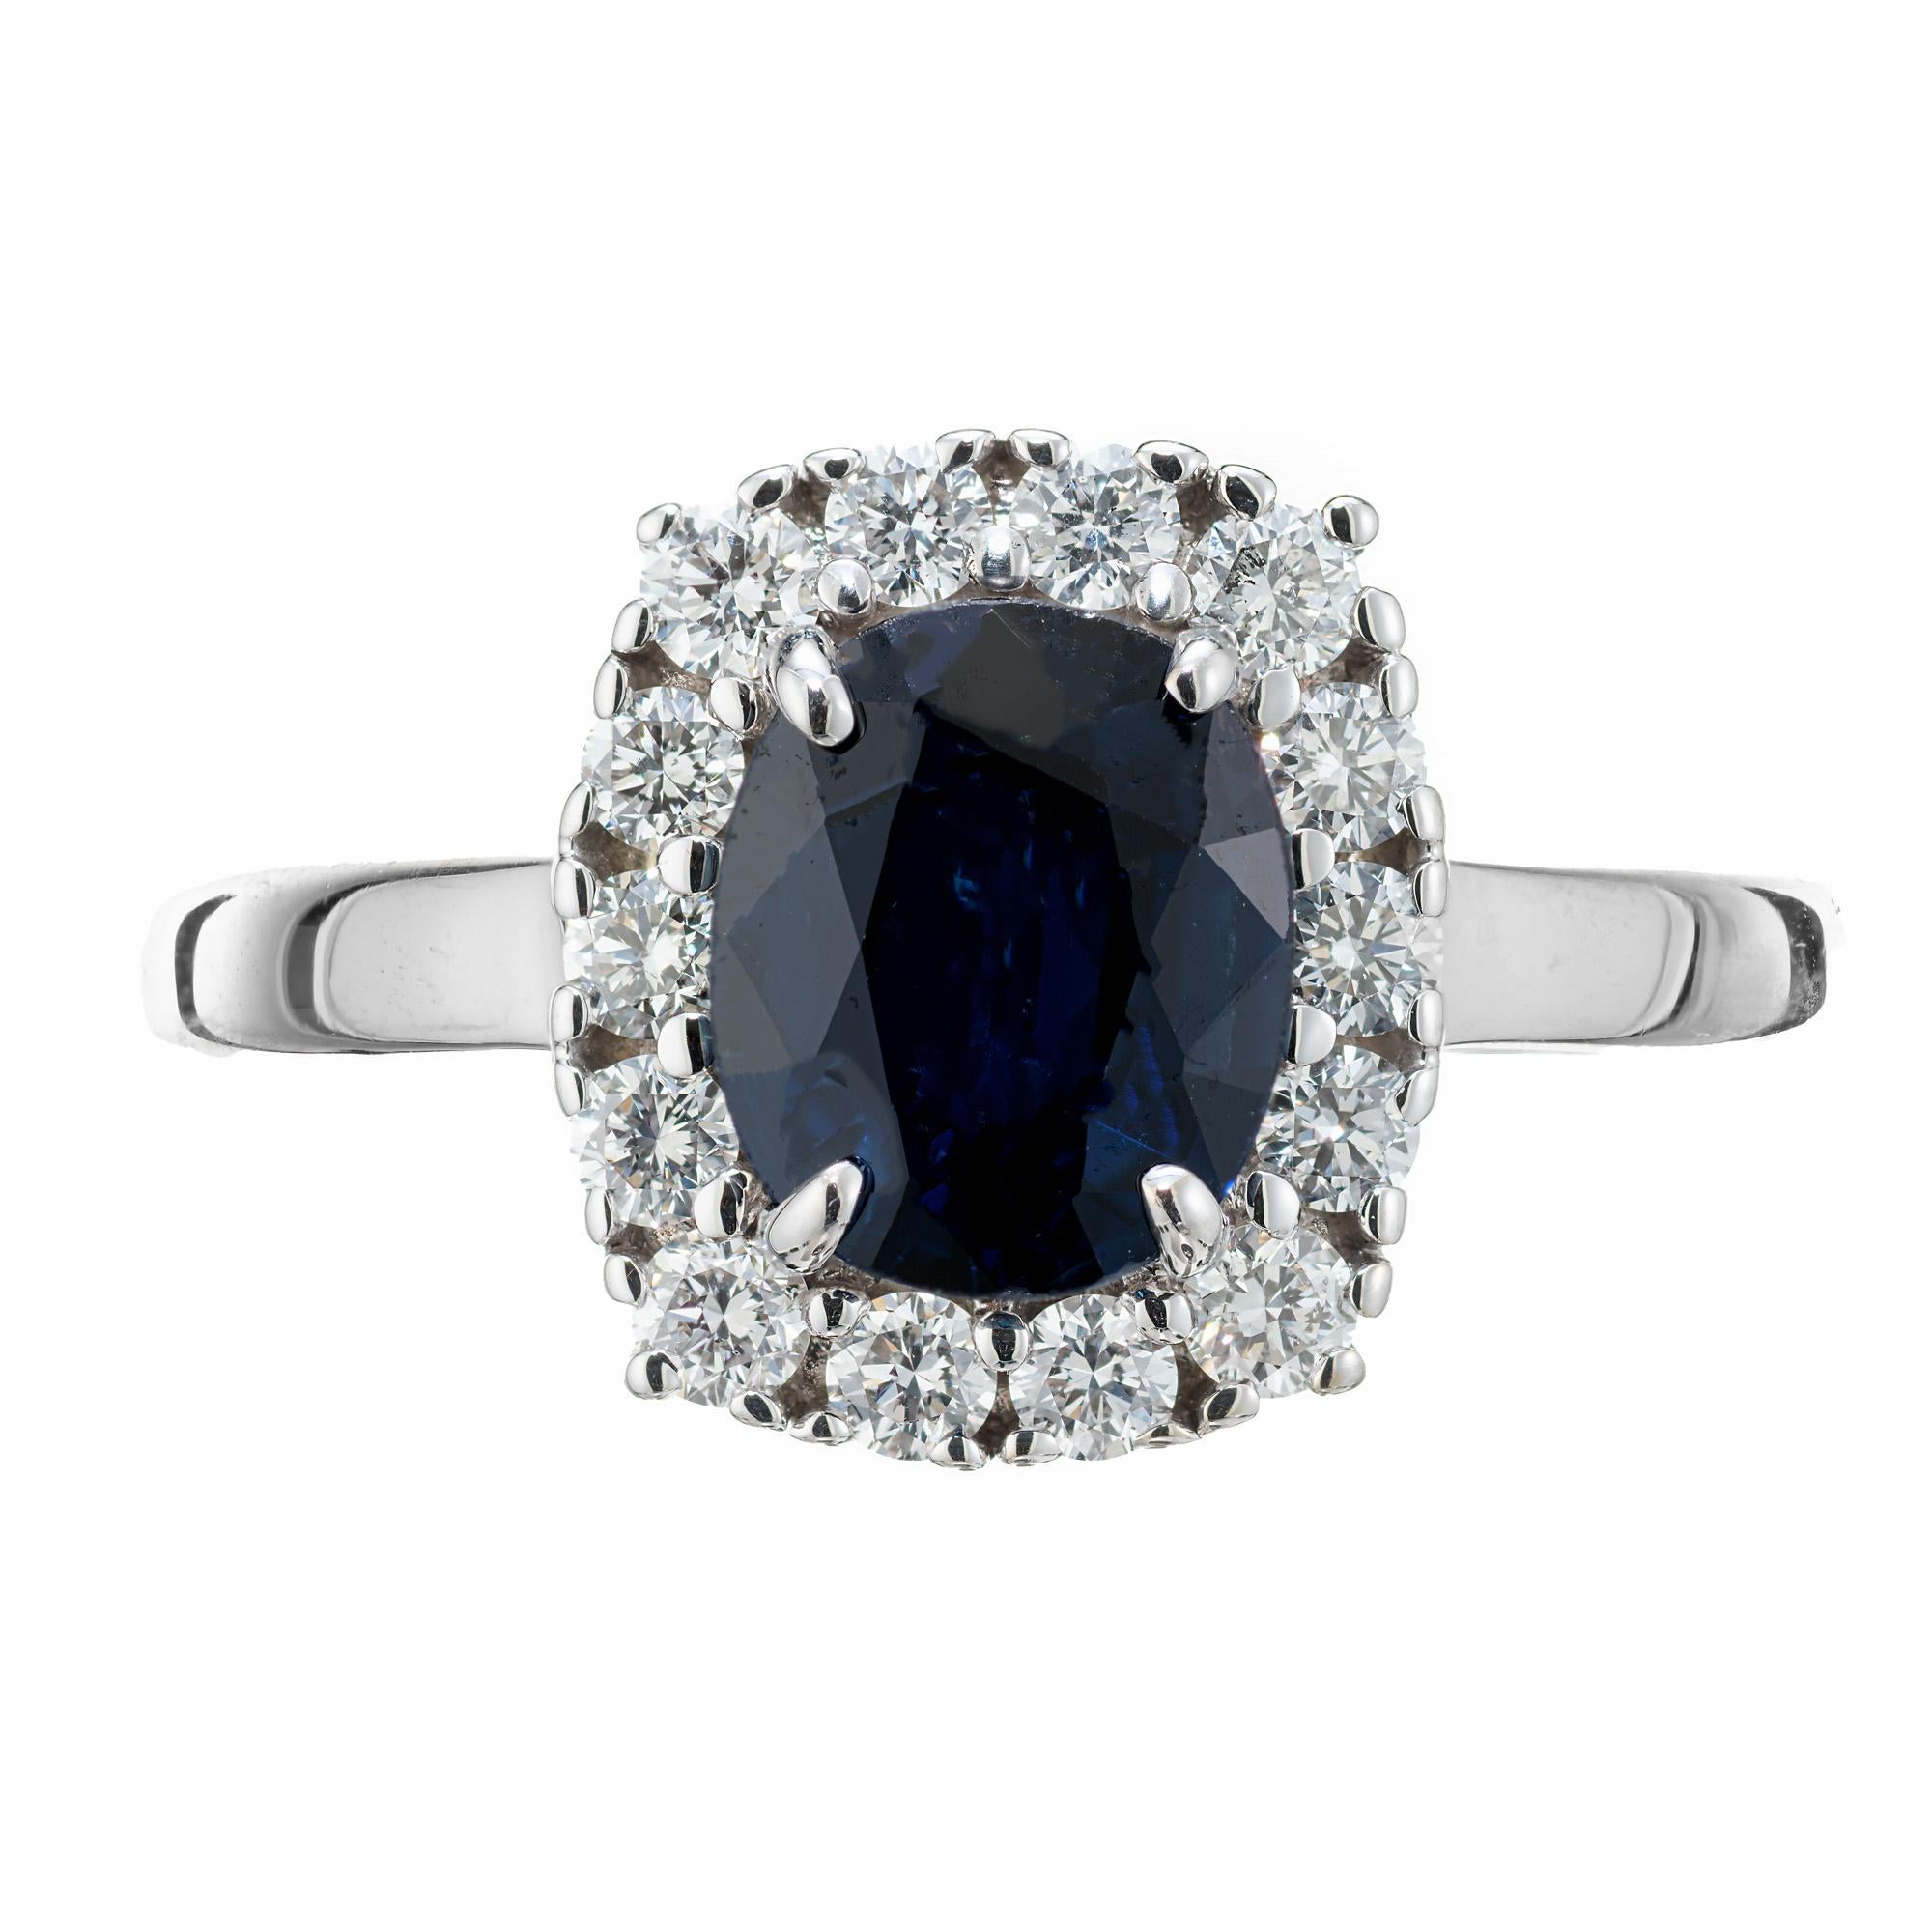 Blue oval sapphire diamond engagement ring. This GIA certified natural, not heat, .90ct. oval deep blue center sapphire is accented with a halo of 14 round brilliant cut, near colorless diamonds in a 14k white gold split shank setting. This ring is